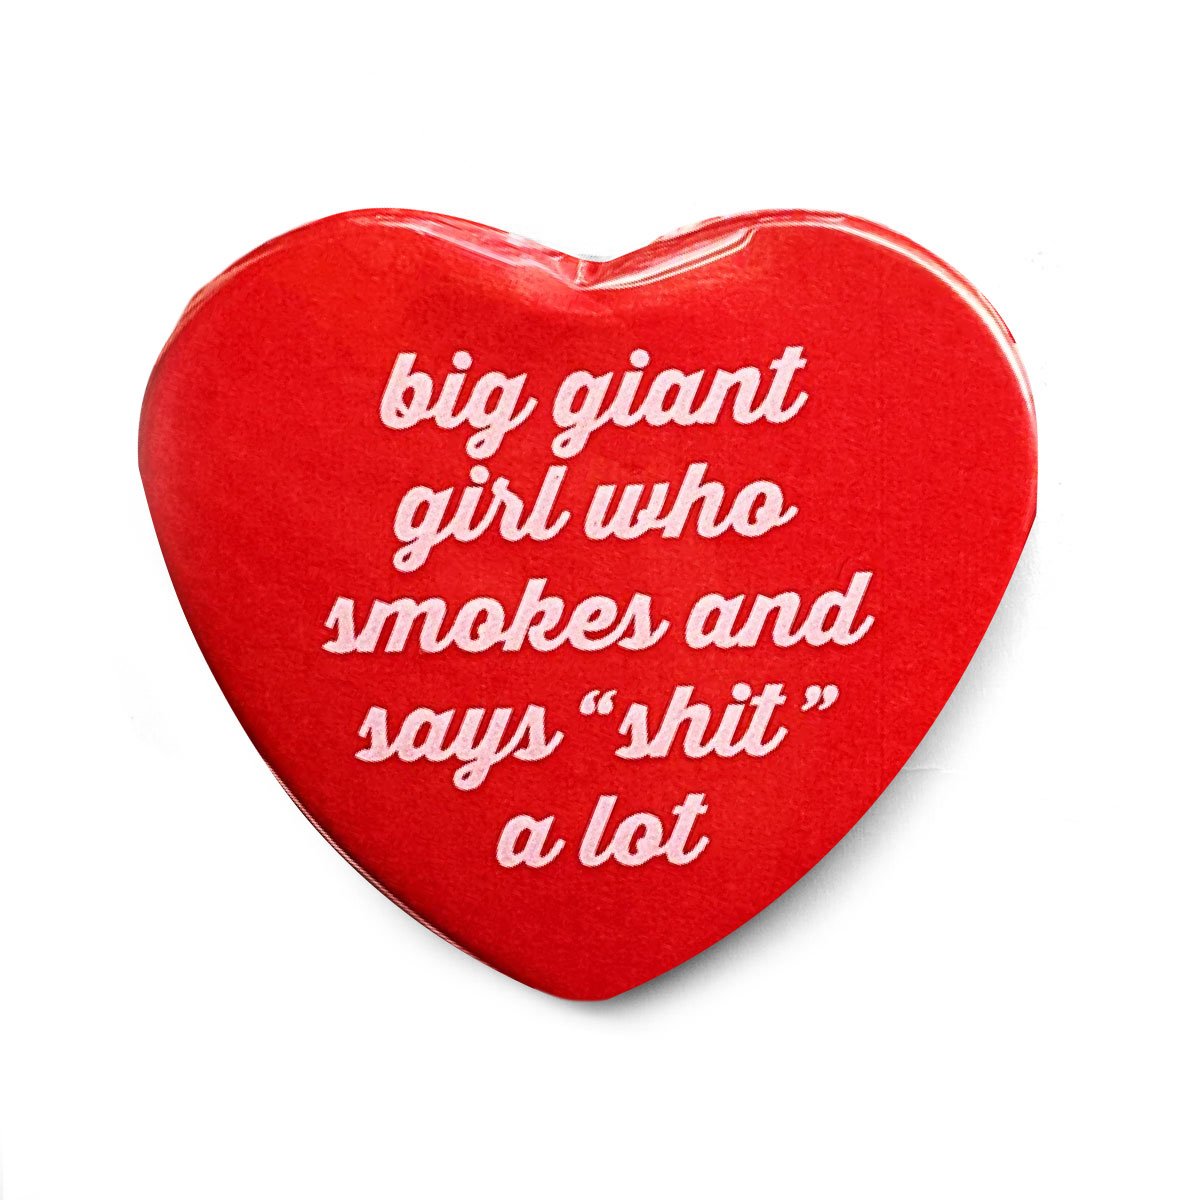 Heavy giant love button